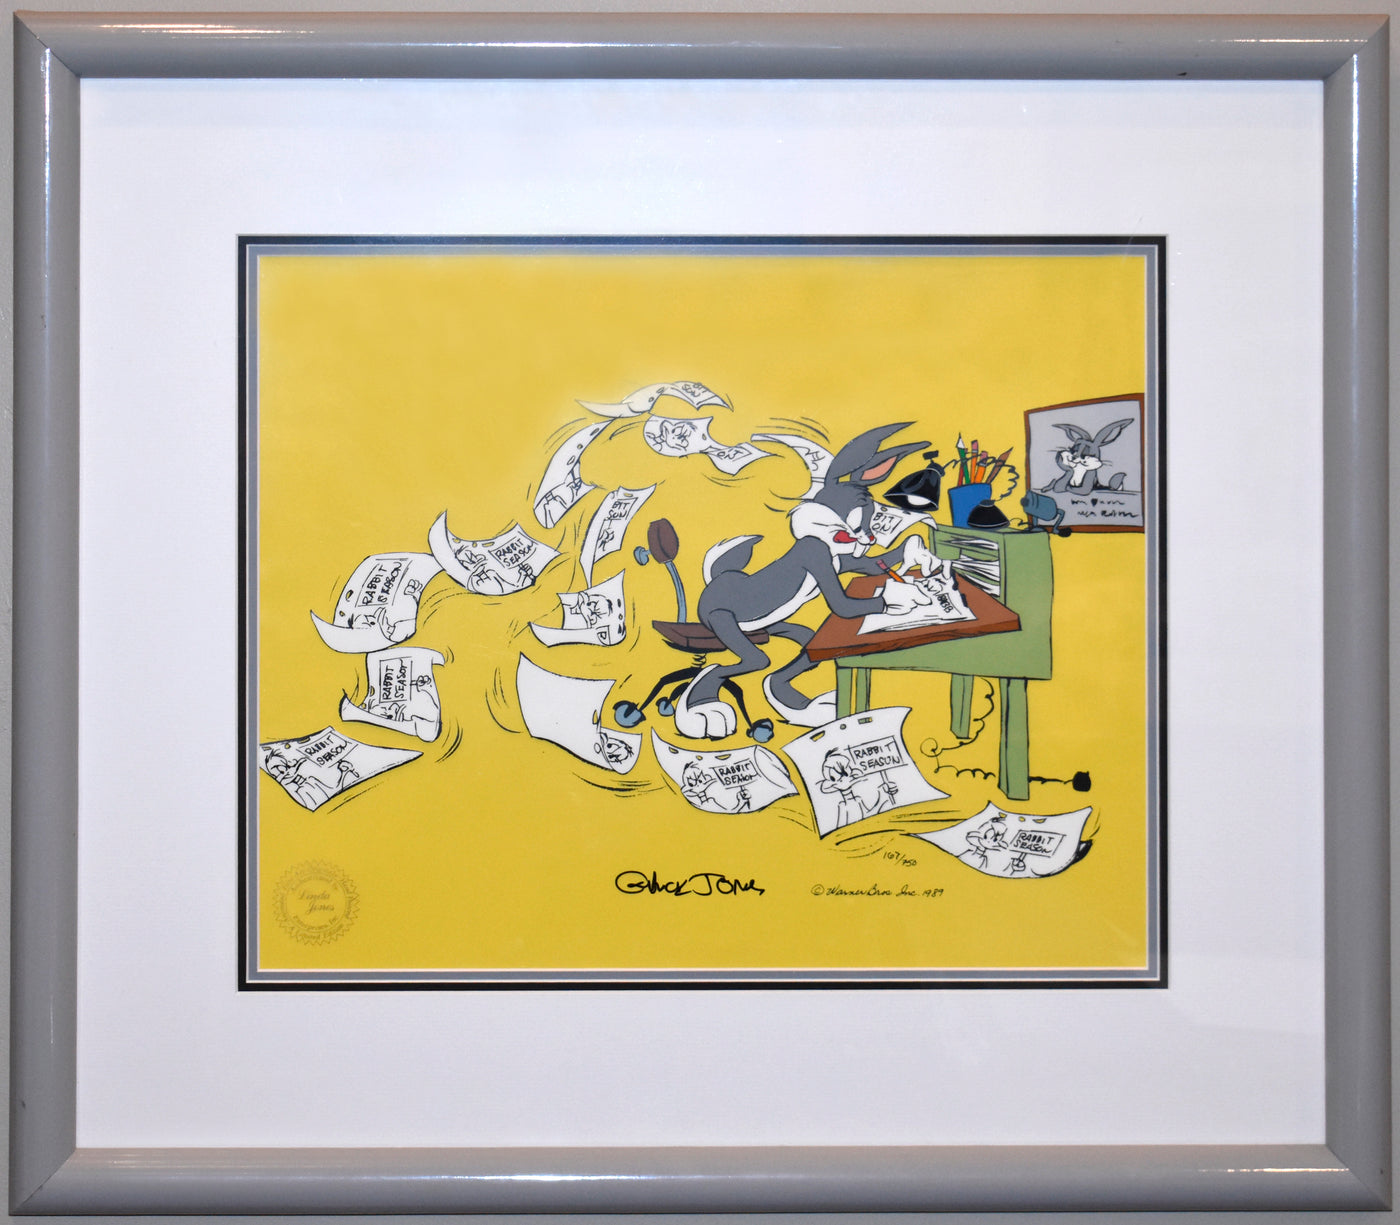 Original Warner Brothers Limited Edition Cel, "Bugs Director", featuring Bugs Bunny